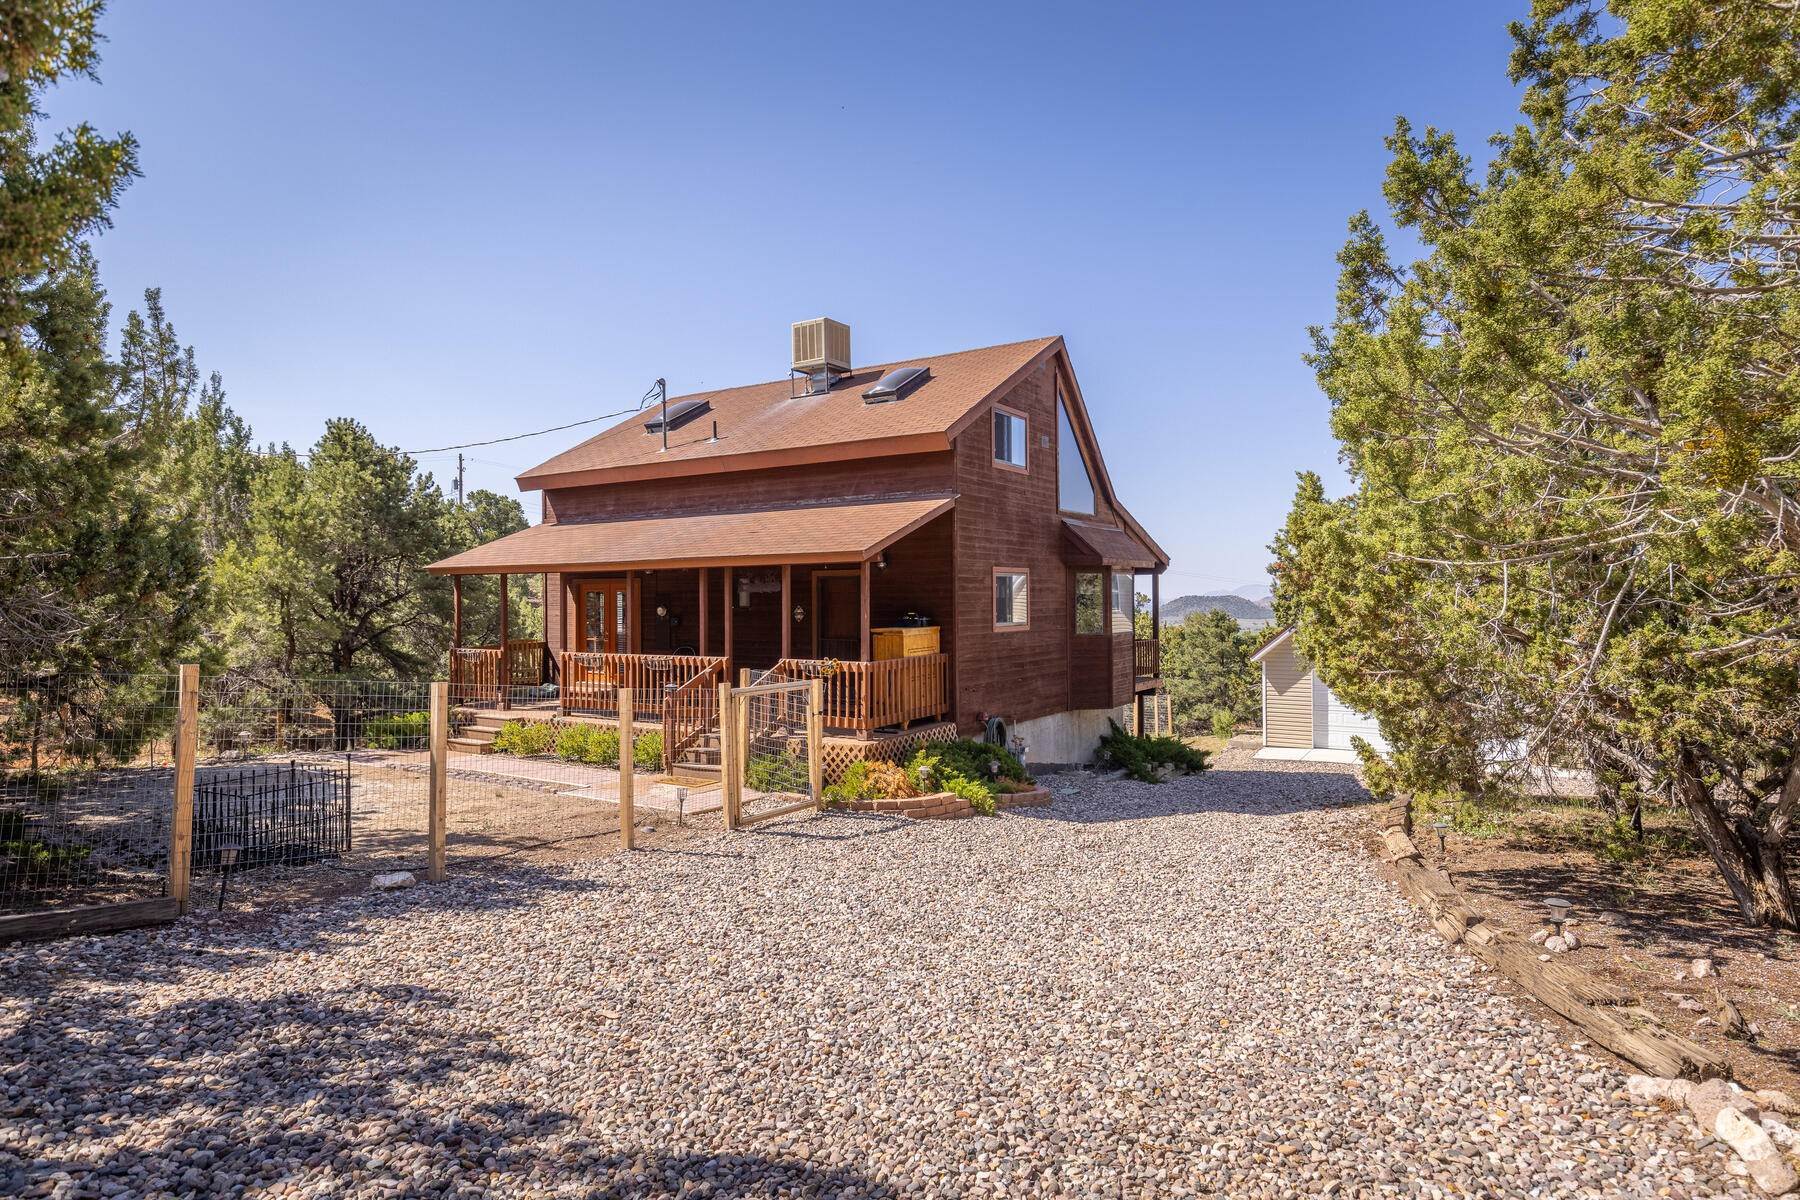 Single Family Homes for Sale at Cozy Log Home In Central 682 E Mule Deer Road Central, Utah 84722 United States